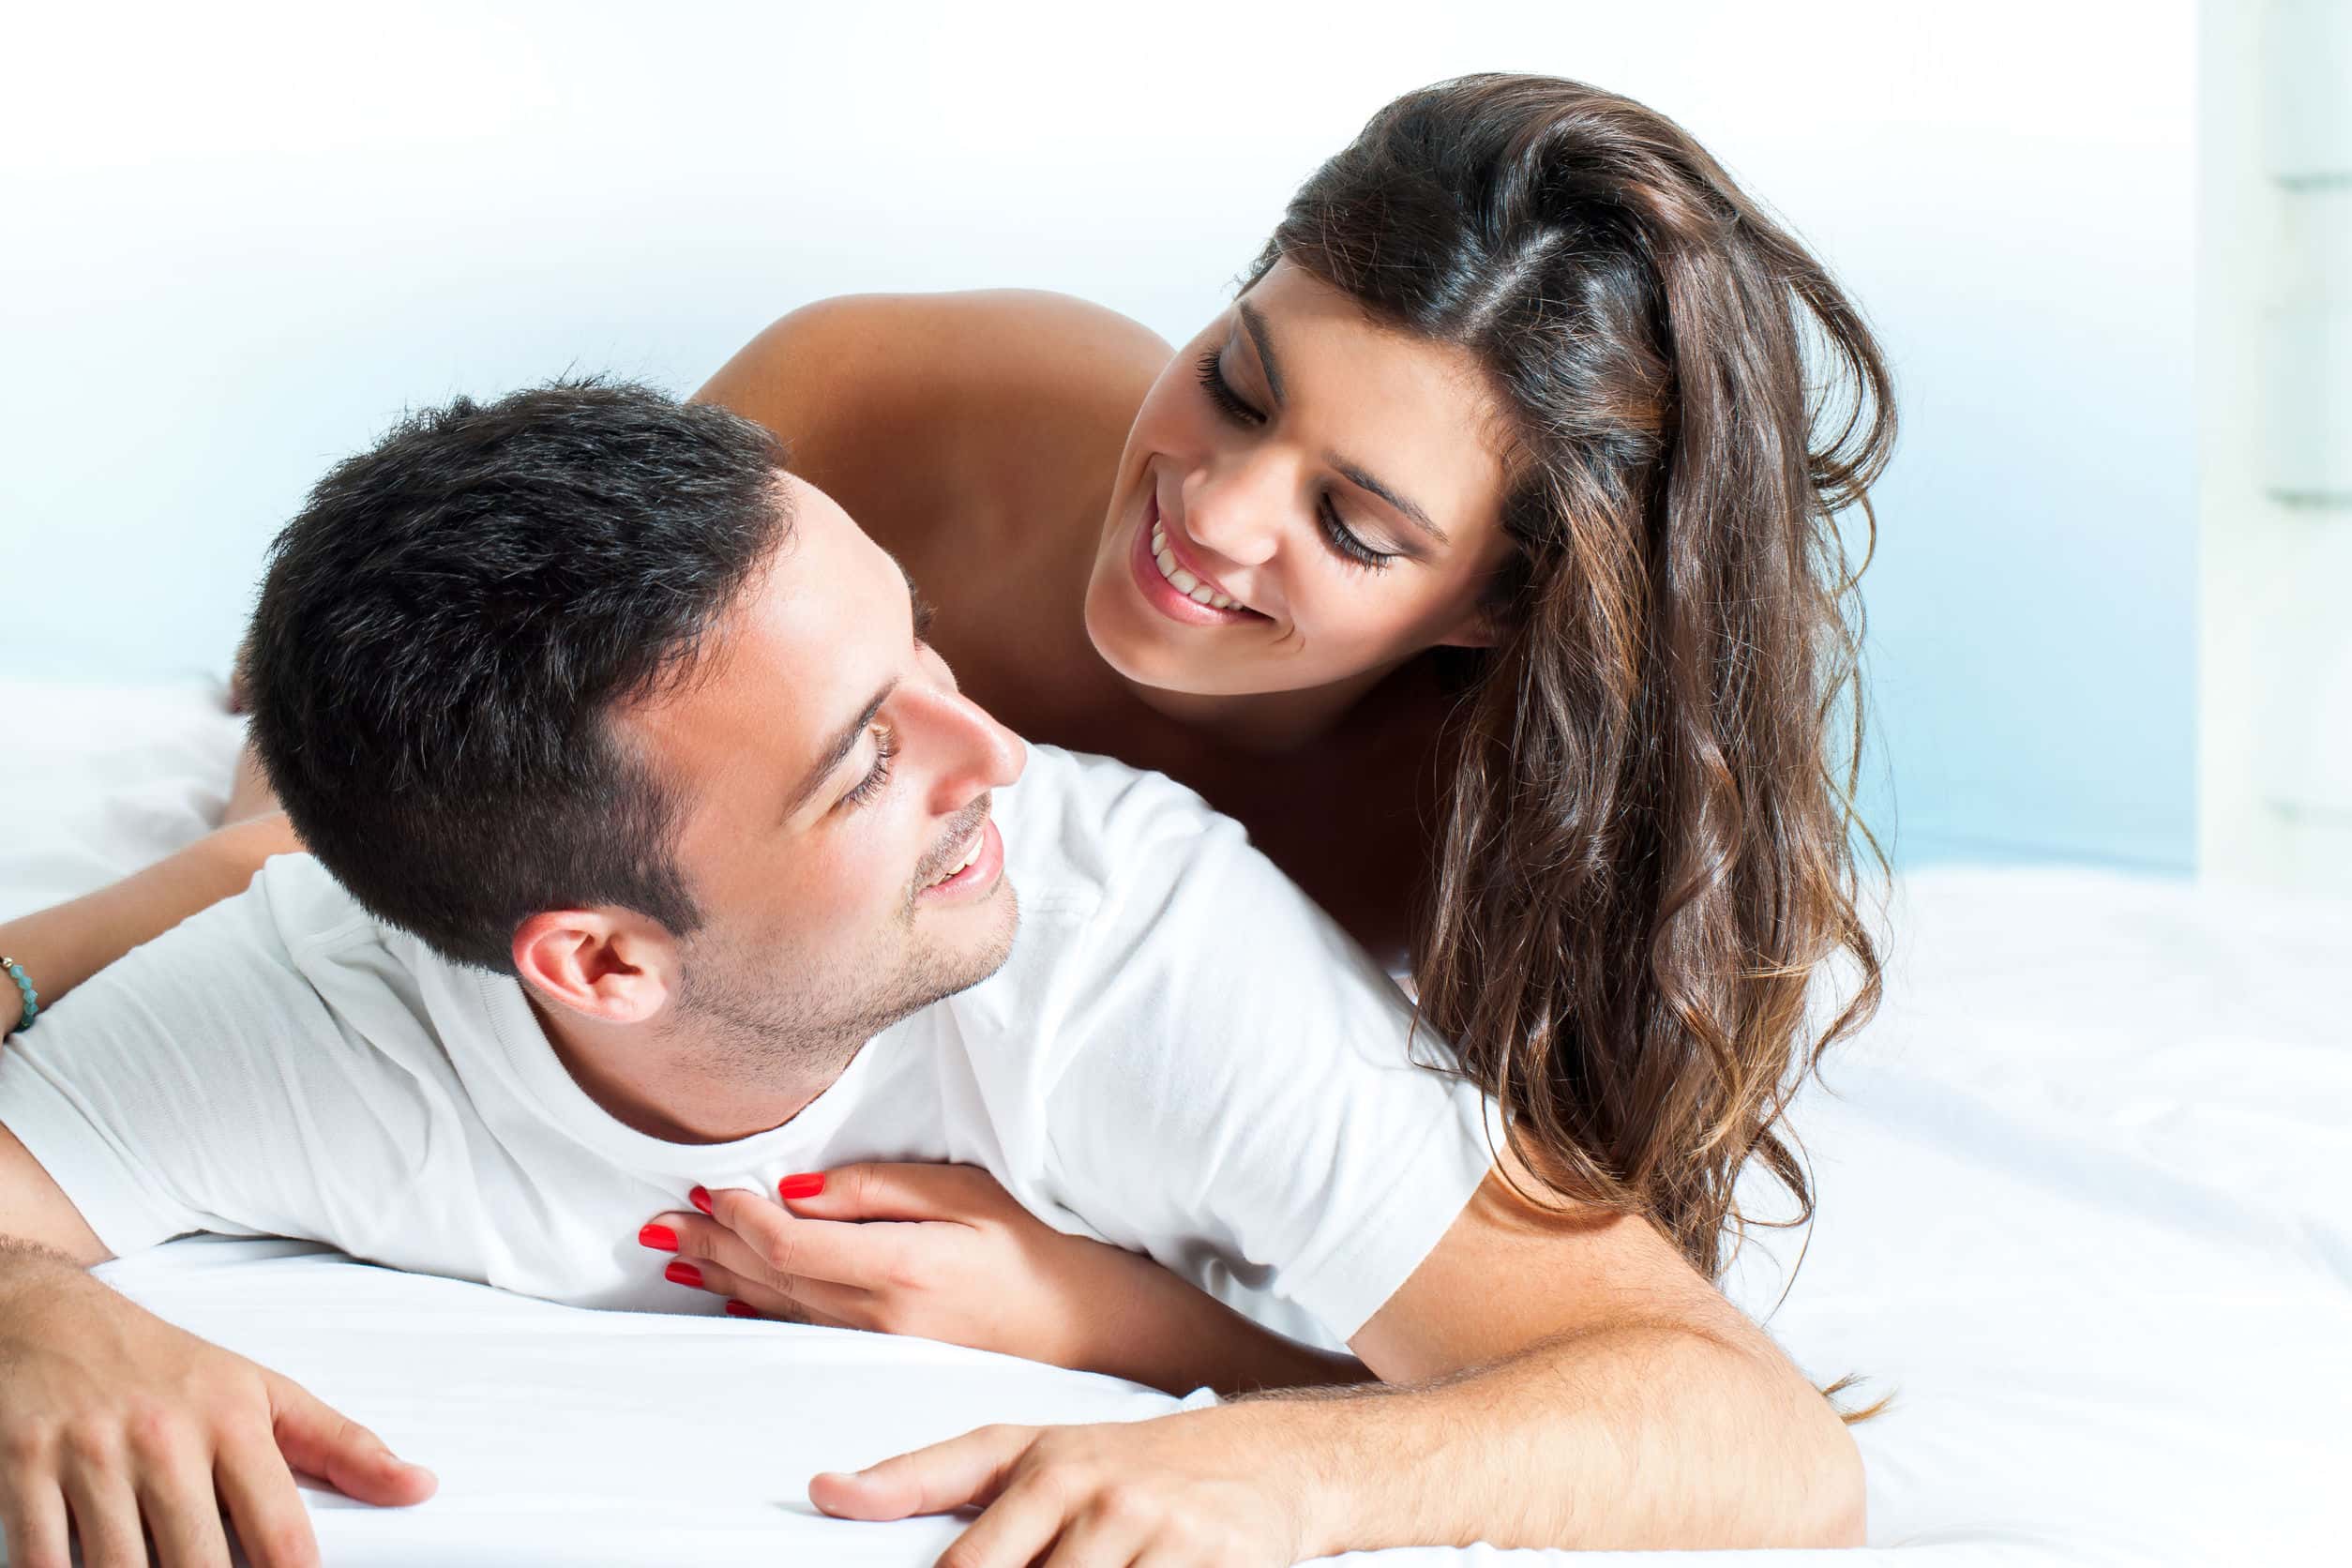 48445795-portrait-of-handsome-young-couple-sharing-intimacy-in-bedroom